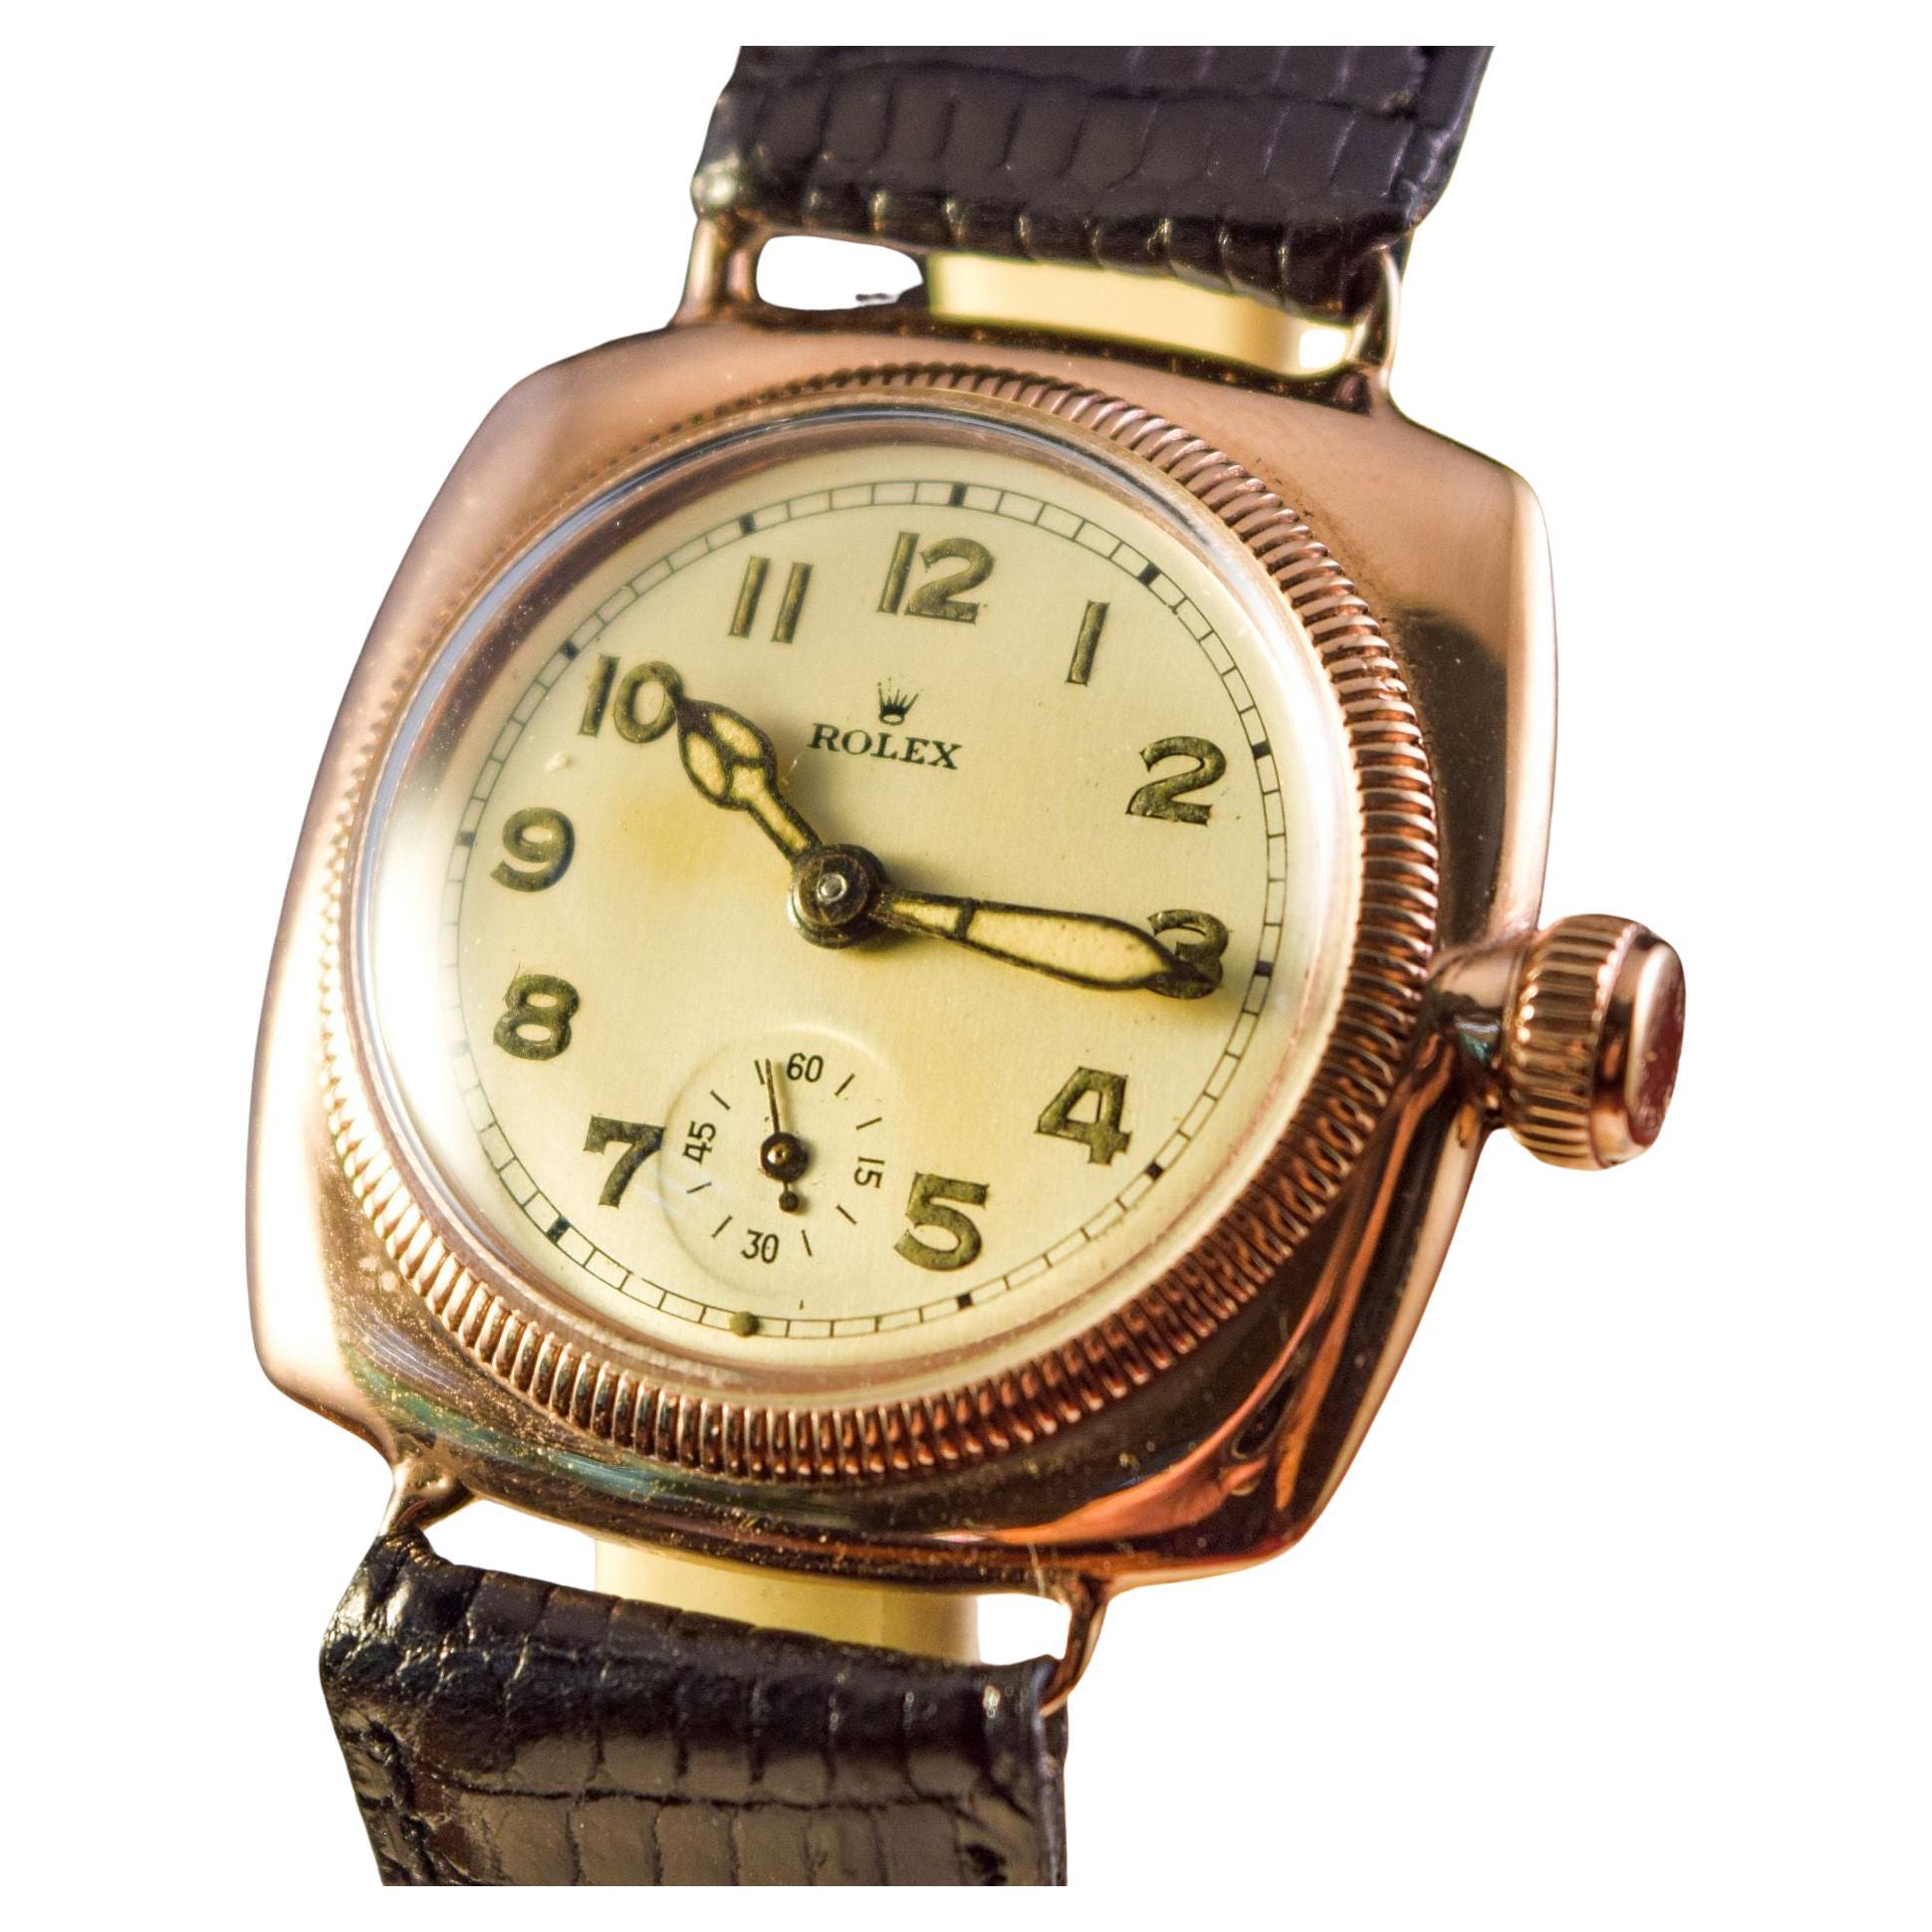 Rolex Early Rolex Oyster solid pink gold Cushion case.
This amazing watch is in amazing condition for it's age
1920's The first waterproof watch in the world.
This is the largest size that was produced by Rolex in those days.
32 MM excluding the